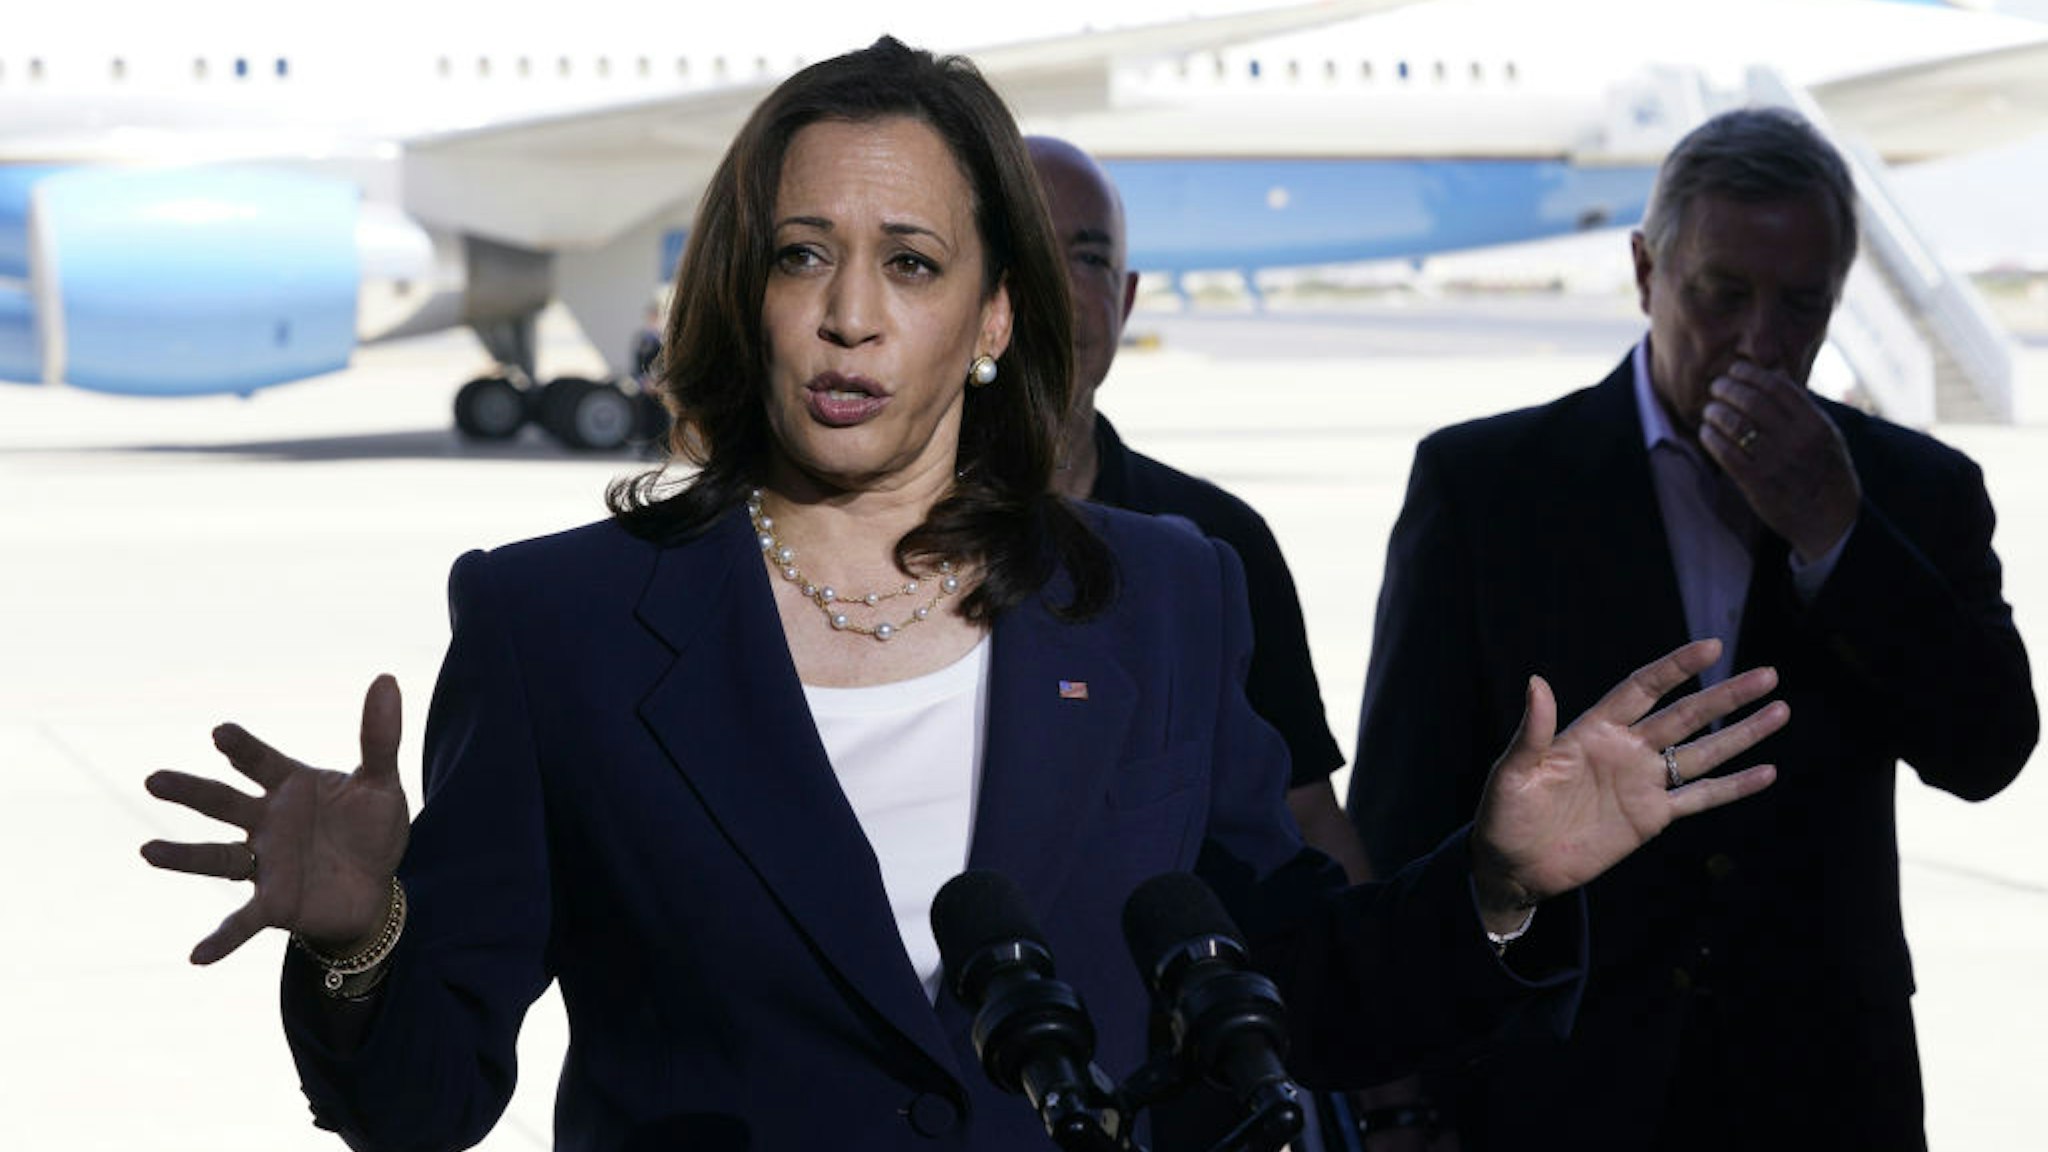 U.S. Vice President Kamala Harris speaks during a news conference at the El Paso International Airport in El Paso, Texas, U.S., on Friday, June 25, 2021. The vice president's visit to the southern border comes after months of denunciations from Republicans, as well as frustration from some Democrats, for not having gone to the border after being chosen to address the root causes of migration from Central America to the U.S. Photographer: Yuri Gripas/Abaca/Bloomberg via Getty Images